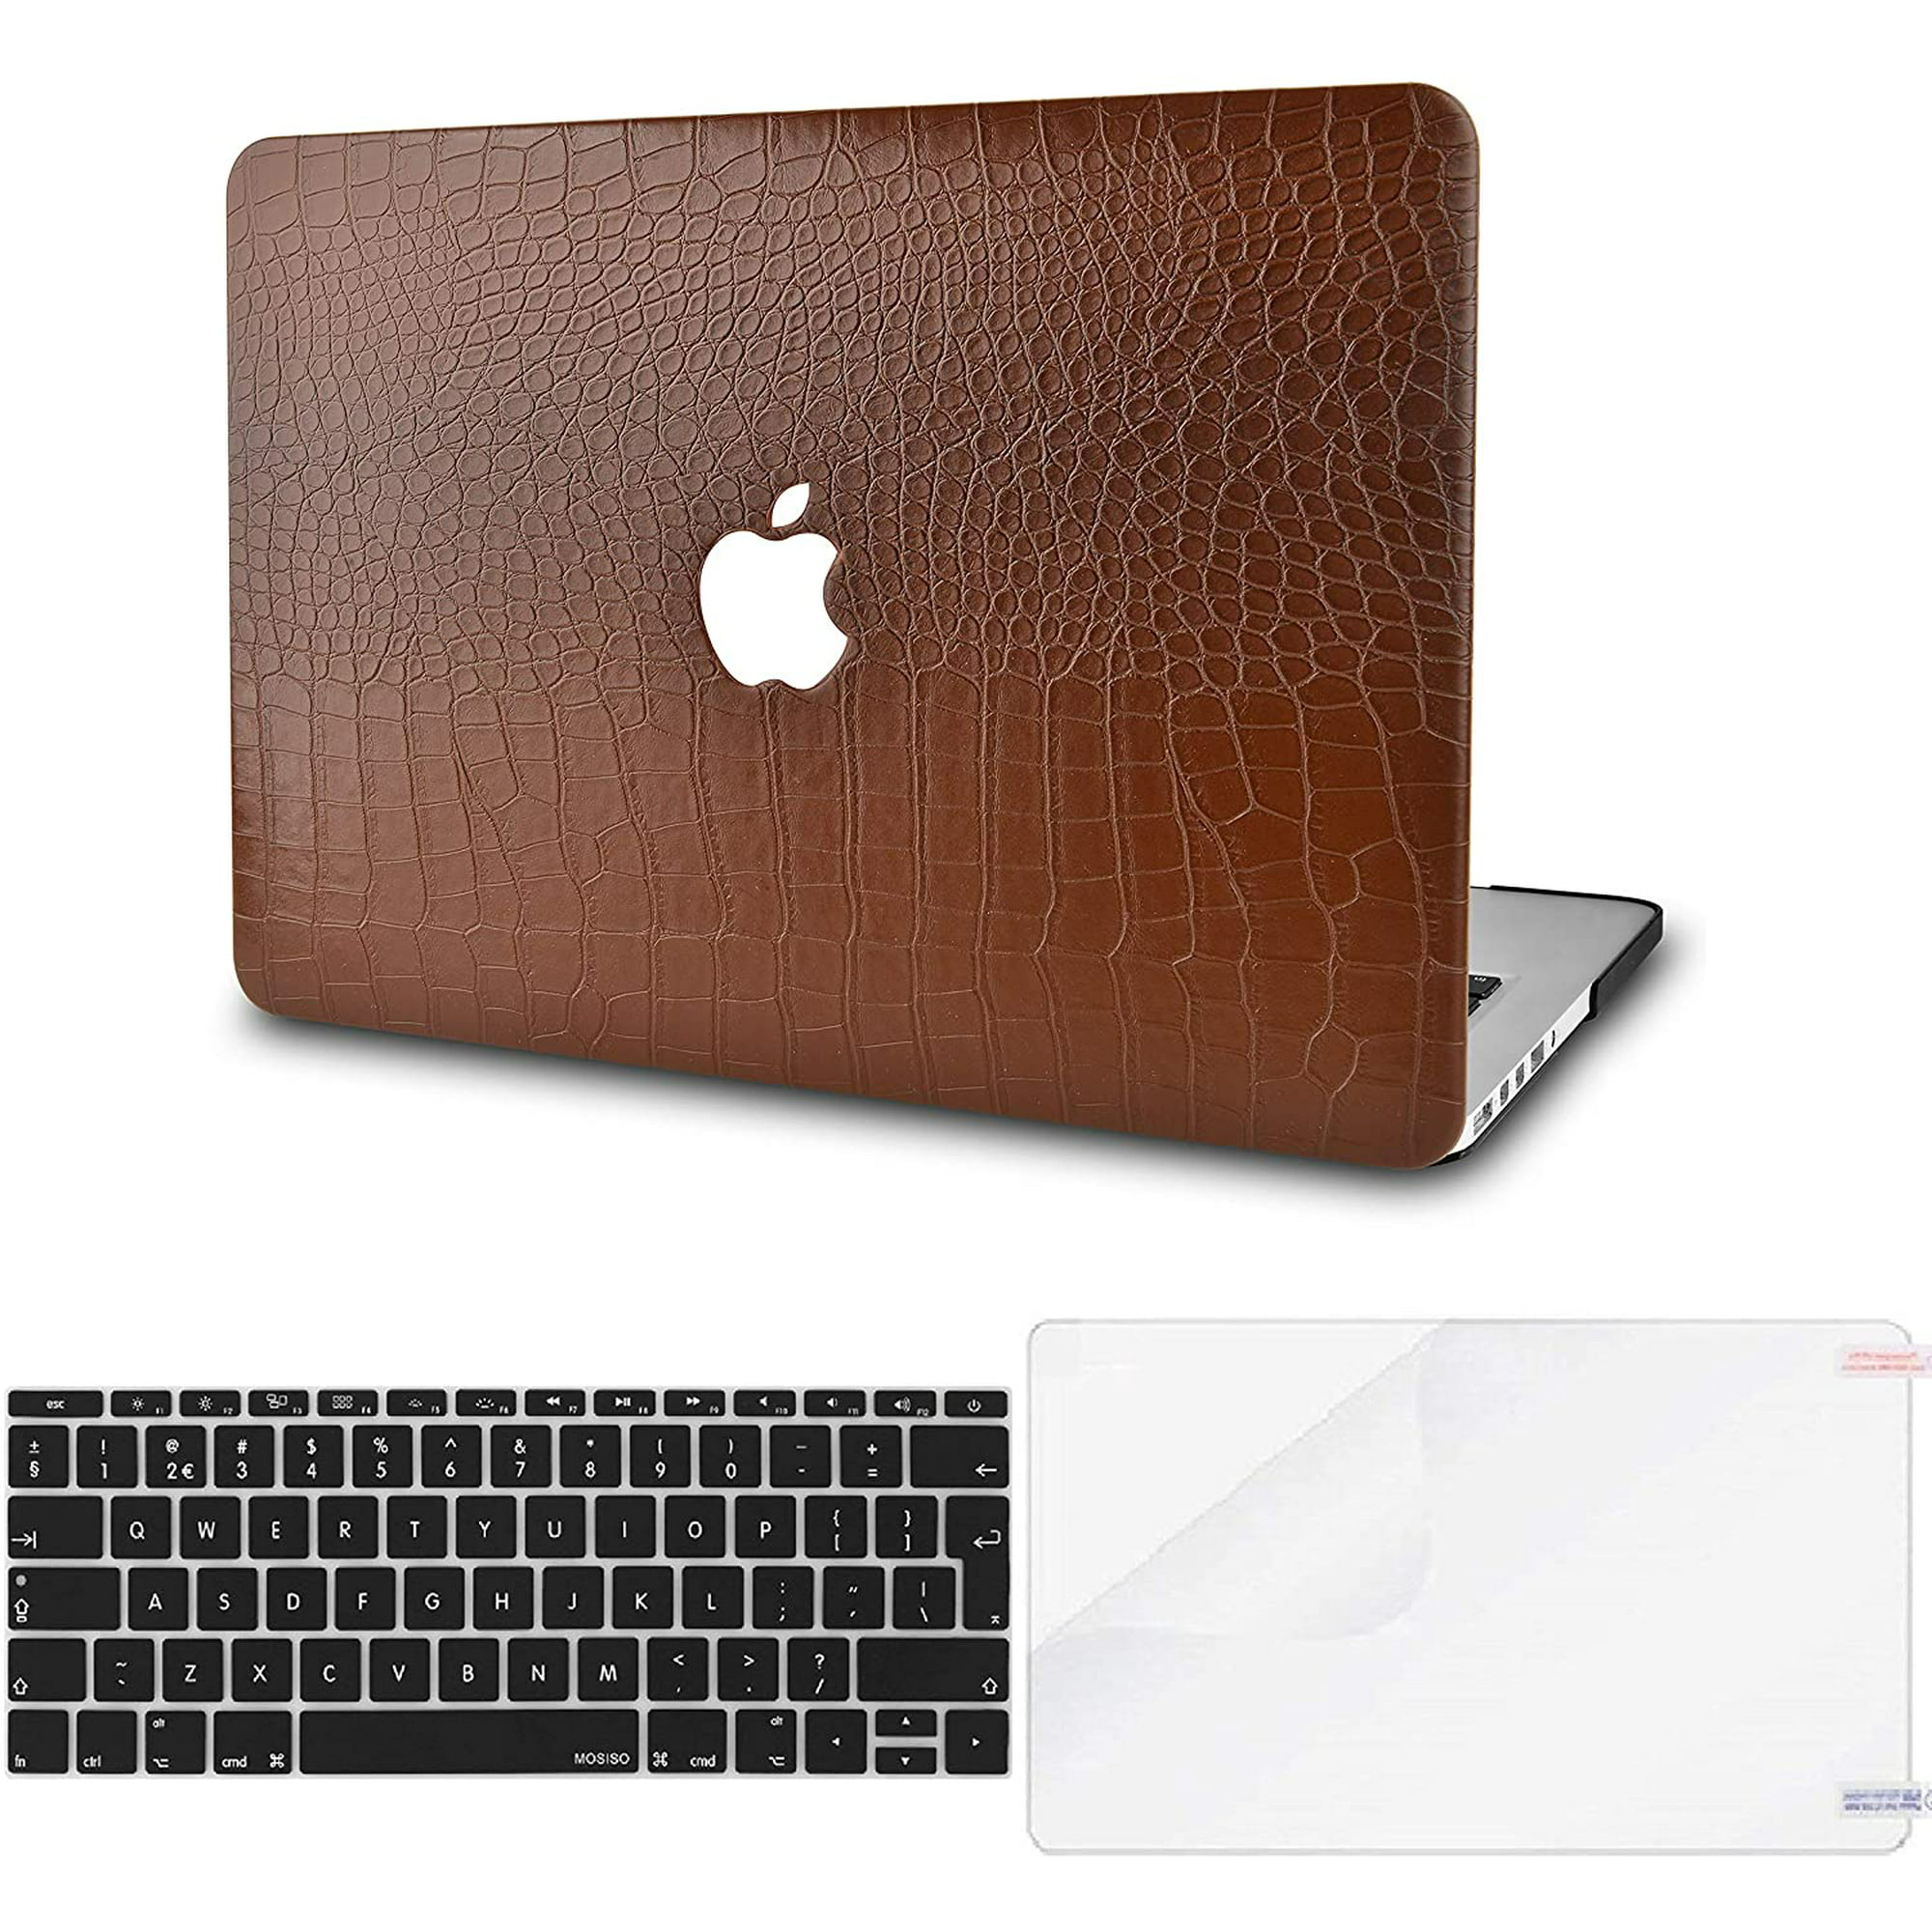 KECC Laptop Case for MacBook Air 13 w/ Keyboard Cover Plastic Hard Shell  Case A1466/A1369 2 in 1 Bundle (Rainbow Mist)